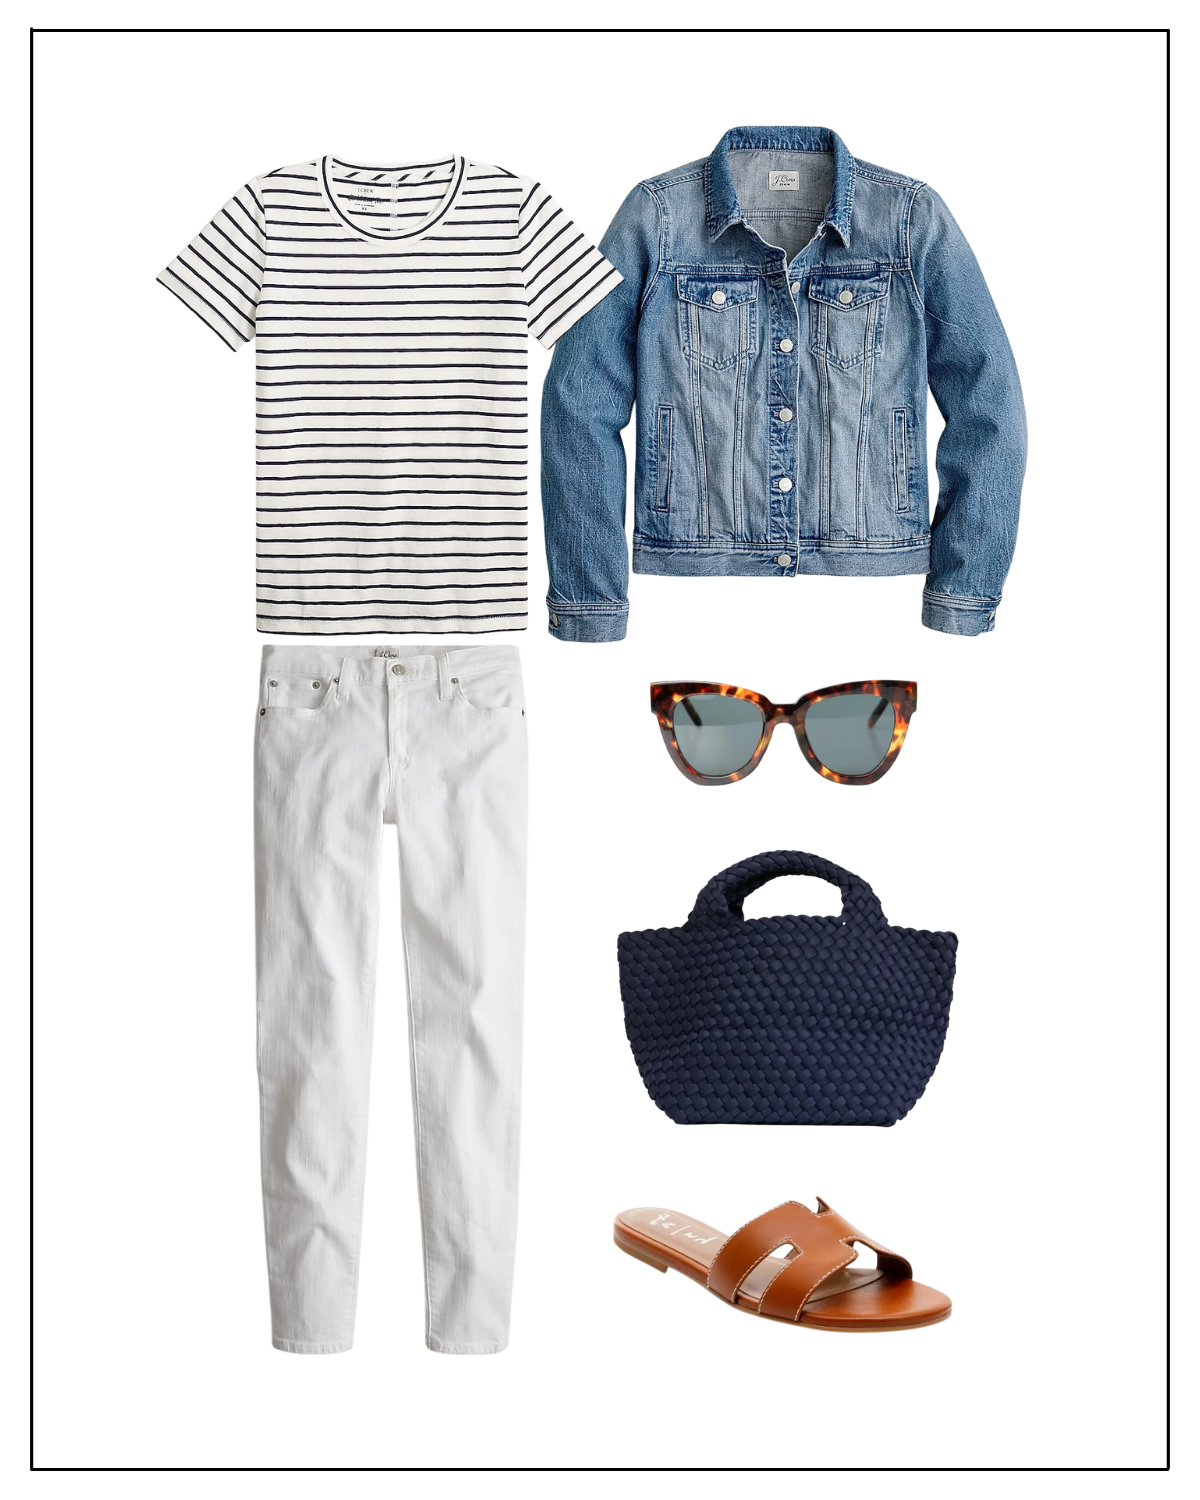 How to Style a Denim Jacket with white jeans